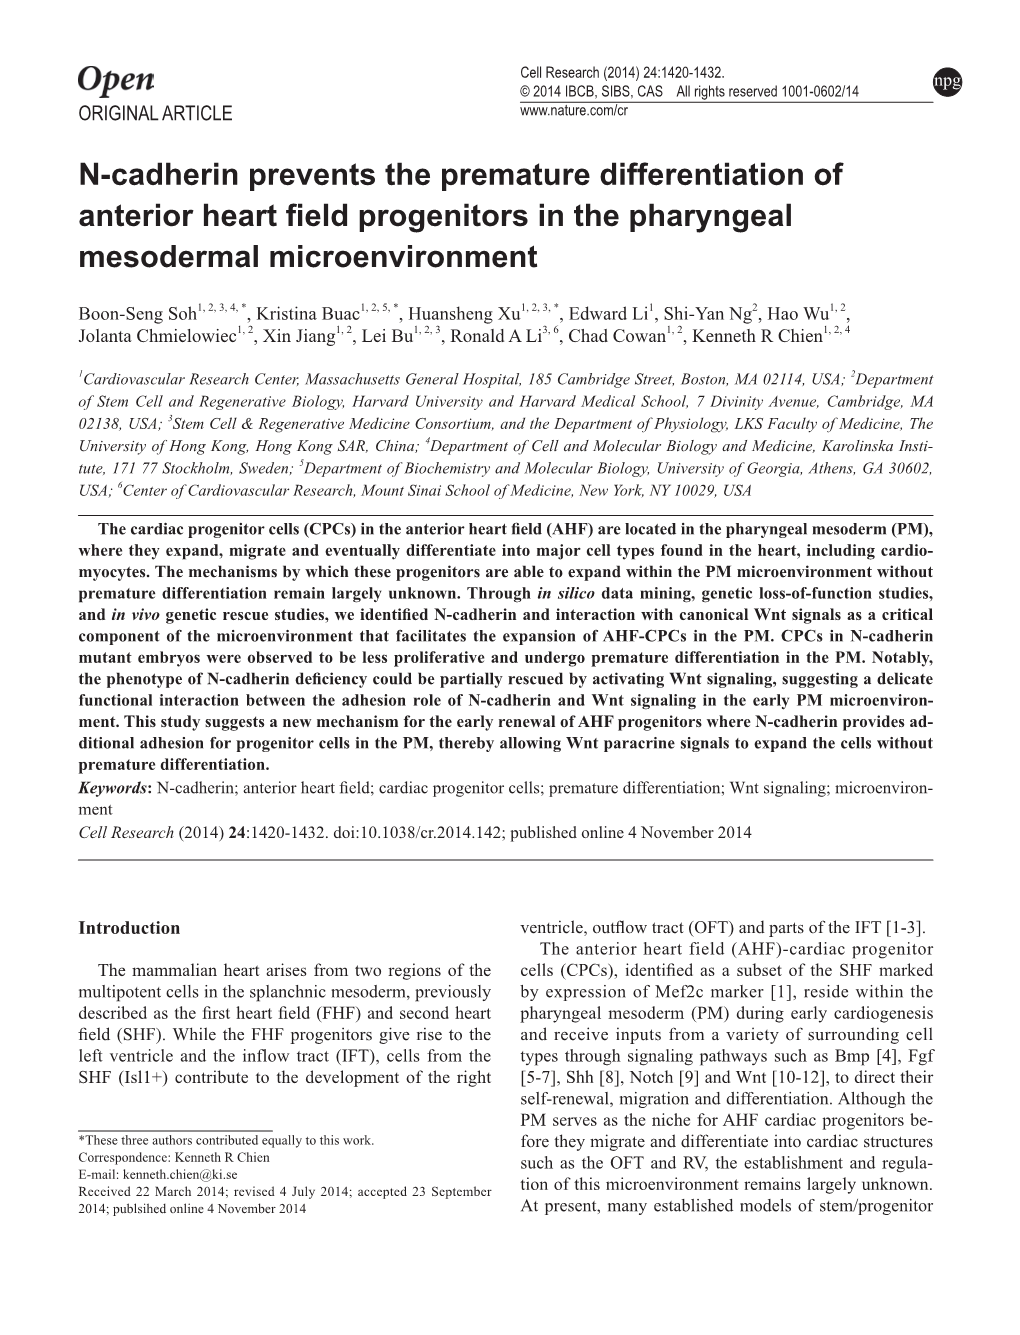 N-Cadherin Prevents the Premature Differentiation of Anterior Heart Field Progenitors in the Pharyngeal Mesodermal Microenvironment